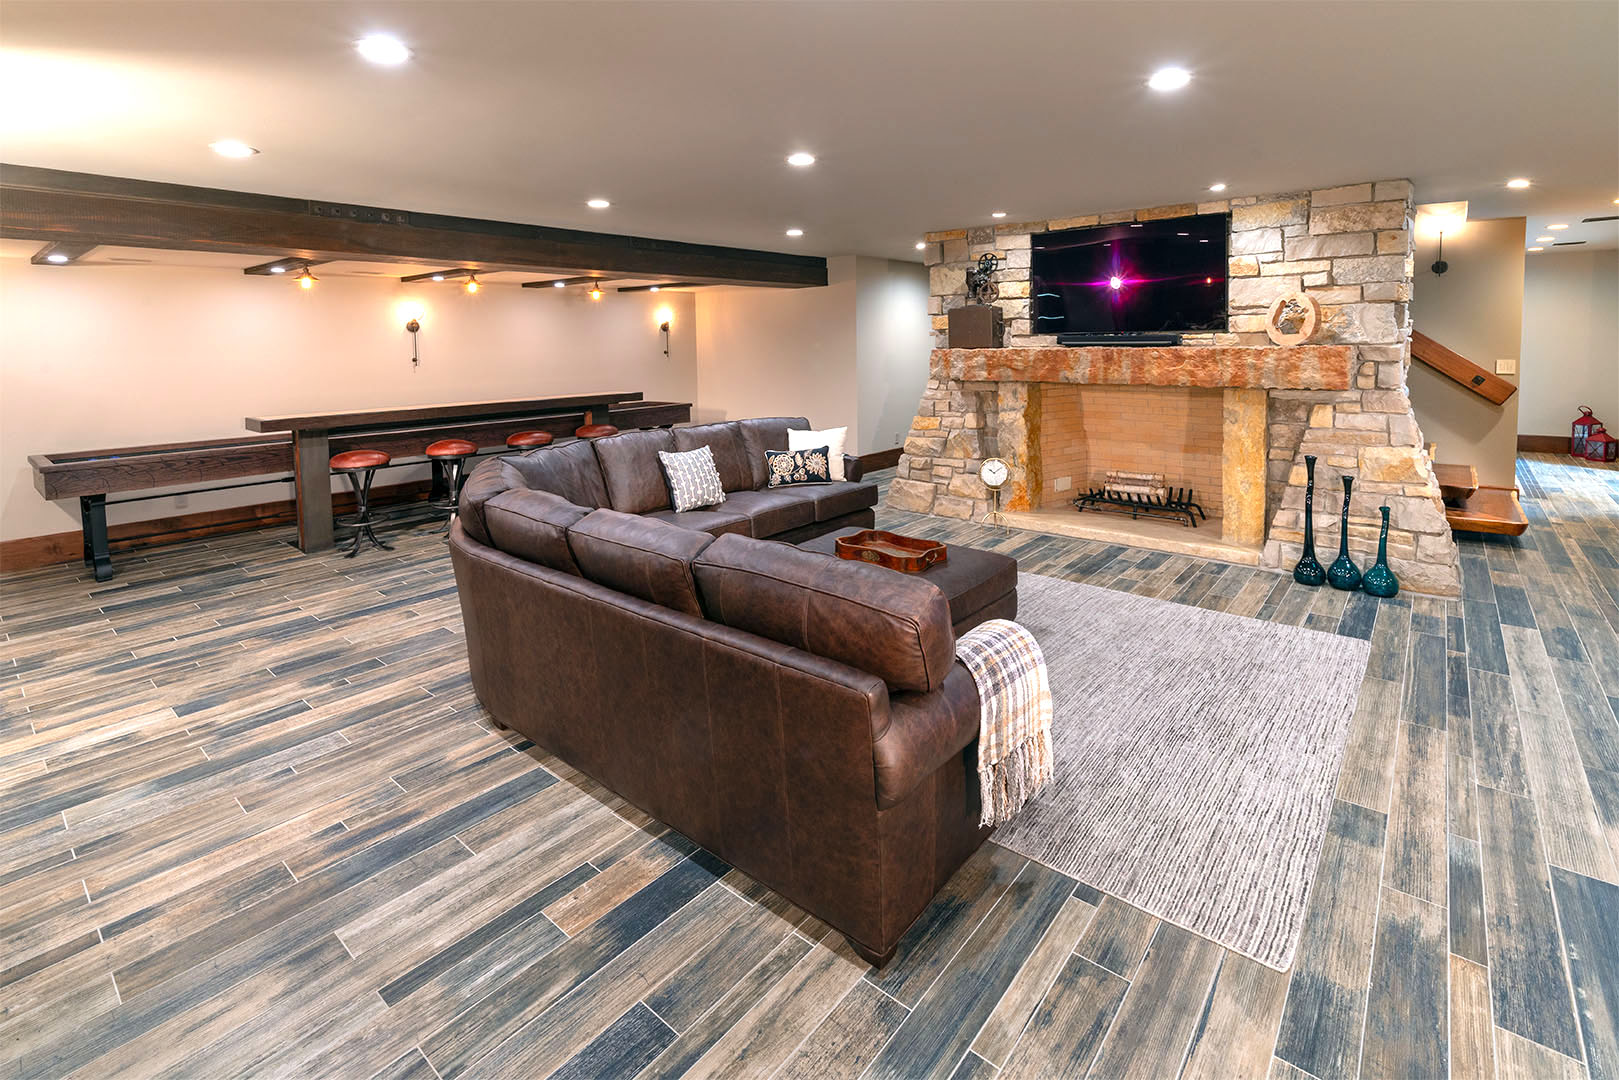 Gameroom and stone fireplace